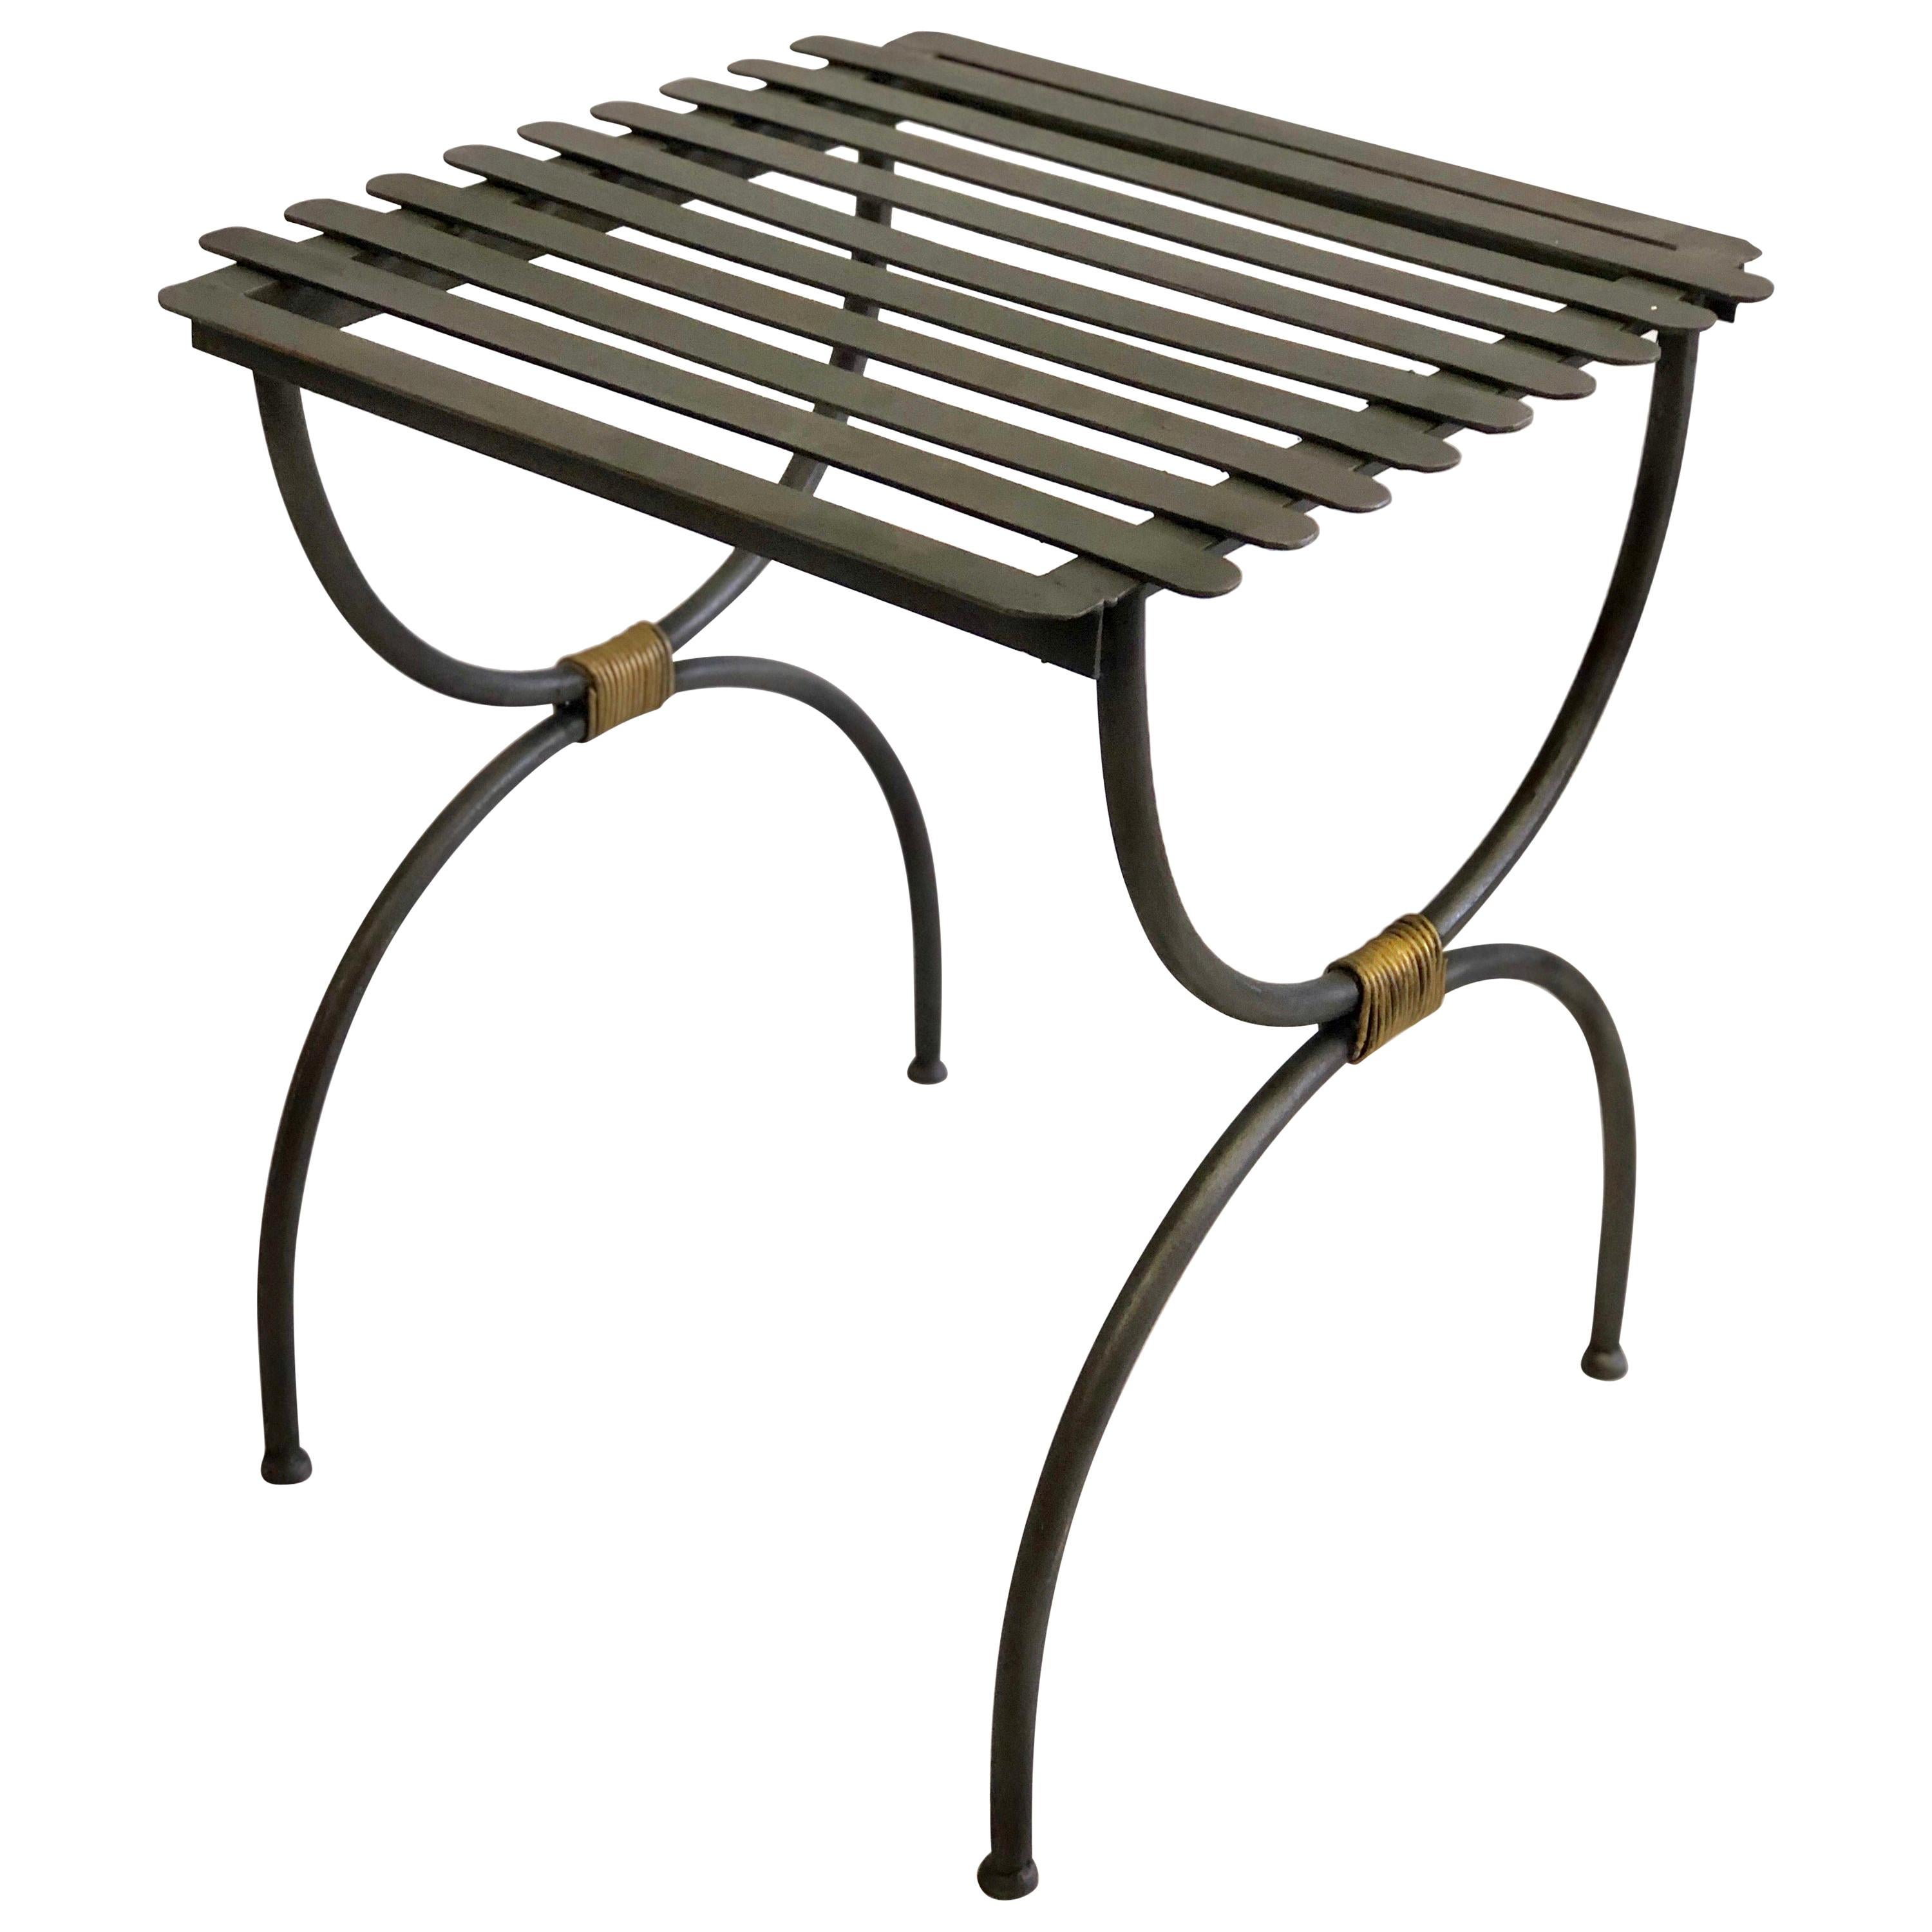 Pair of French Modern Neoclassical Iron Bench / Luggage Racks For Sale